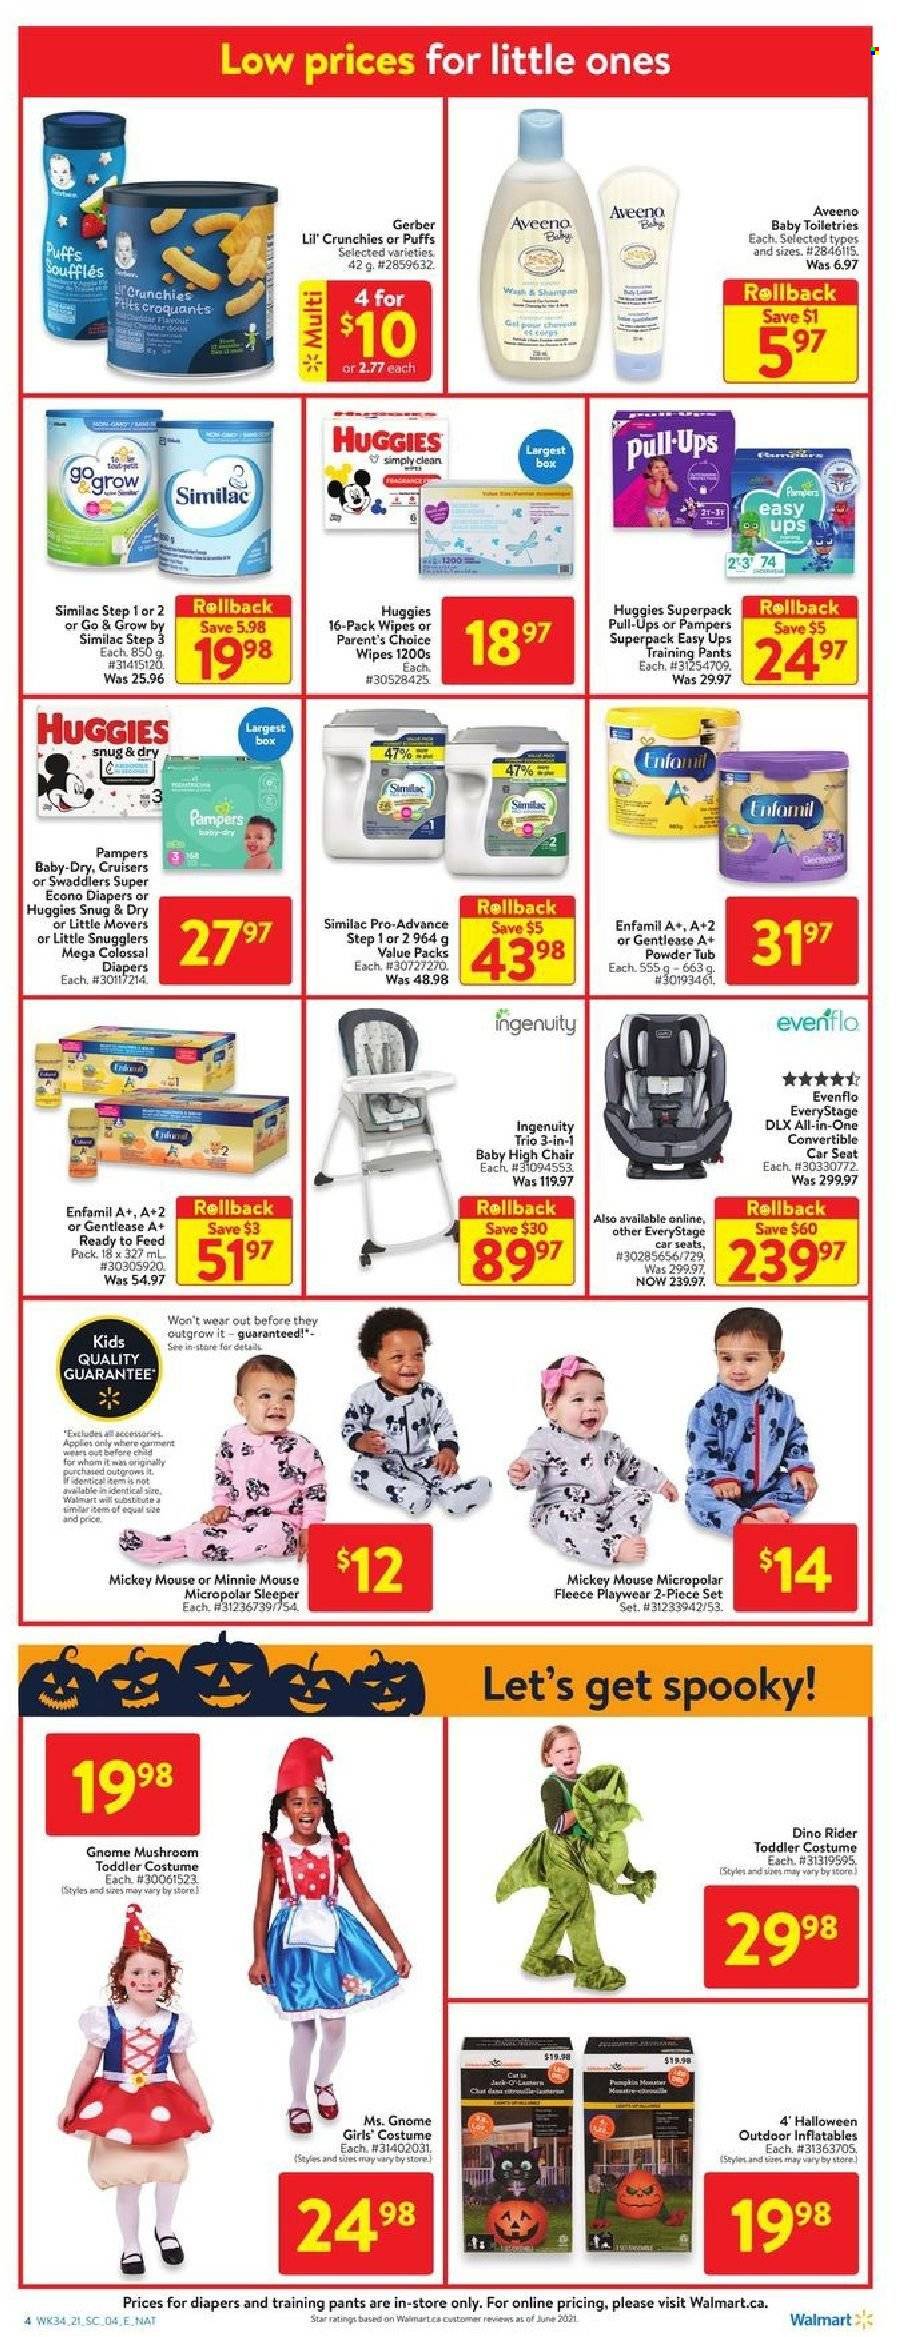 thumbnail - Walmart Flyer - September 16, 2021 - September 22, 2021 - Sales products - mushrooms, puffs, Mickey Mouse, Gerber, Lil' Crunchies, Enfamil, Similac, wipes, pants, nappies, baby pants, Aveeno, Omo, Minnie Mouse, high chair, chair, costume, Snug, Ingenuity, baby car seat, Huggies, Pampers. Page 8.